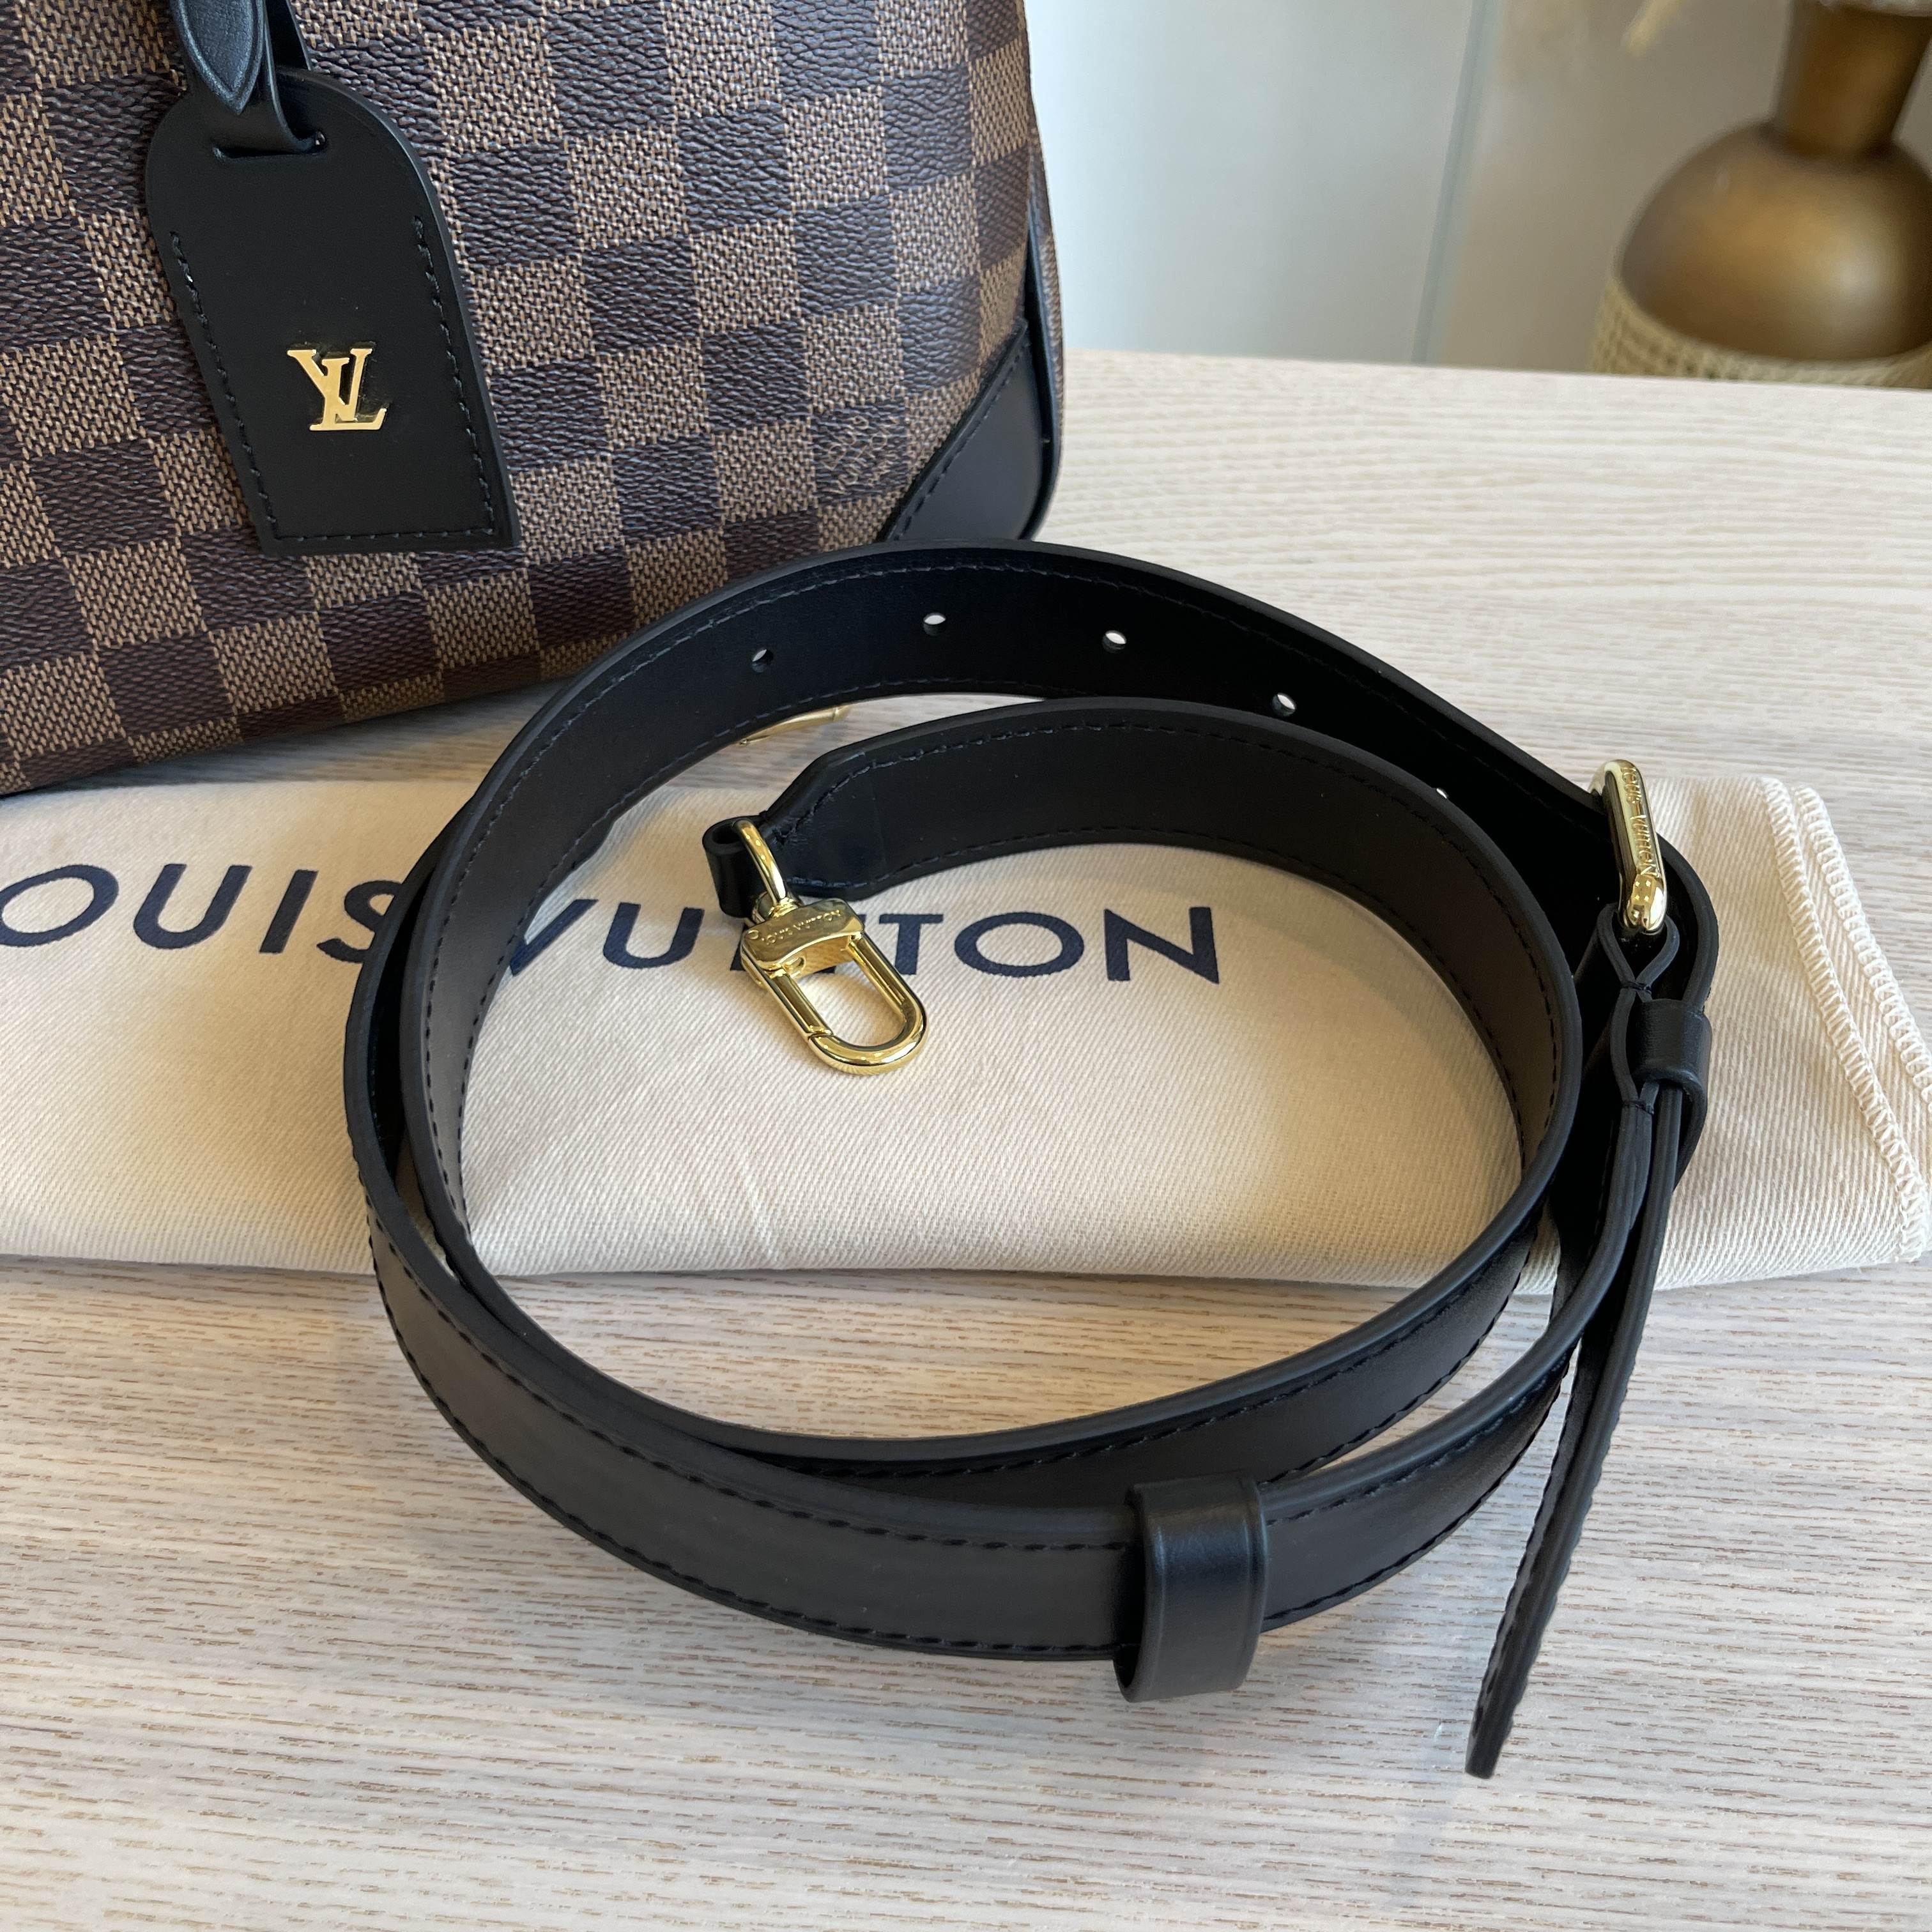 Absolutely Stunning Louis Vuitton Odeon Pm Ebene Like New Includes dust bag  and strap RM 4200 6, 9, 12 week payment plan available with fee…